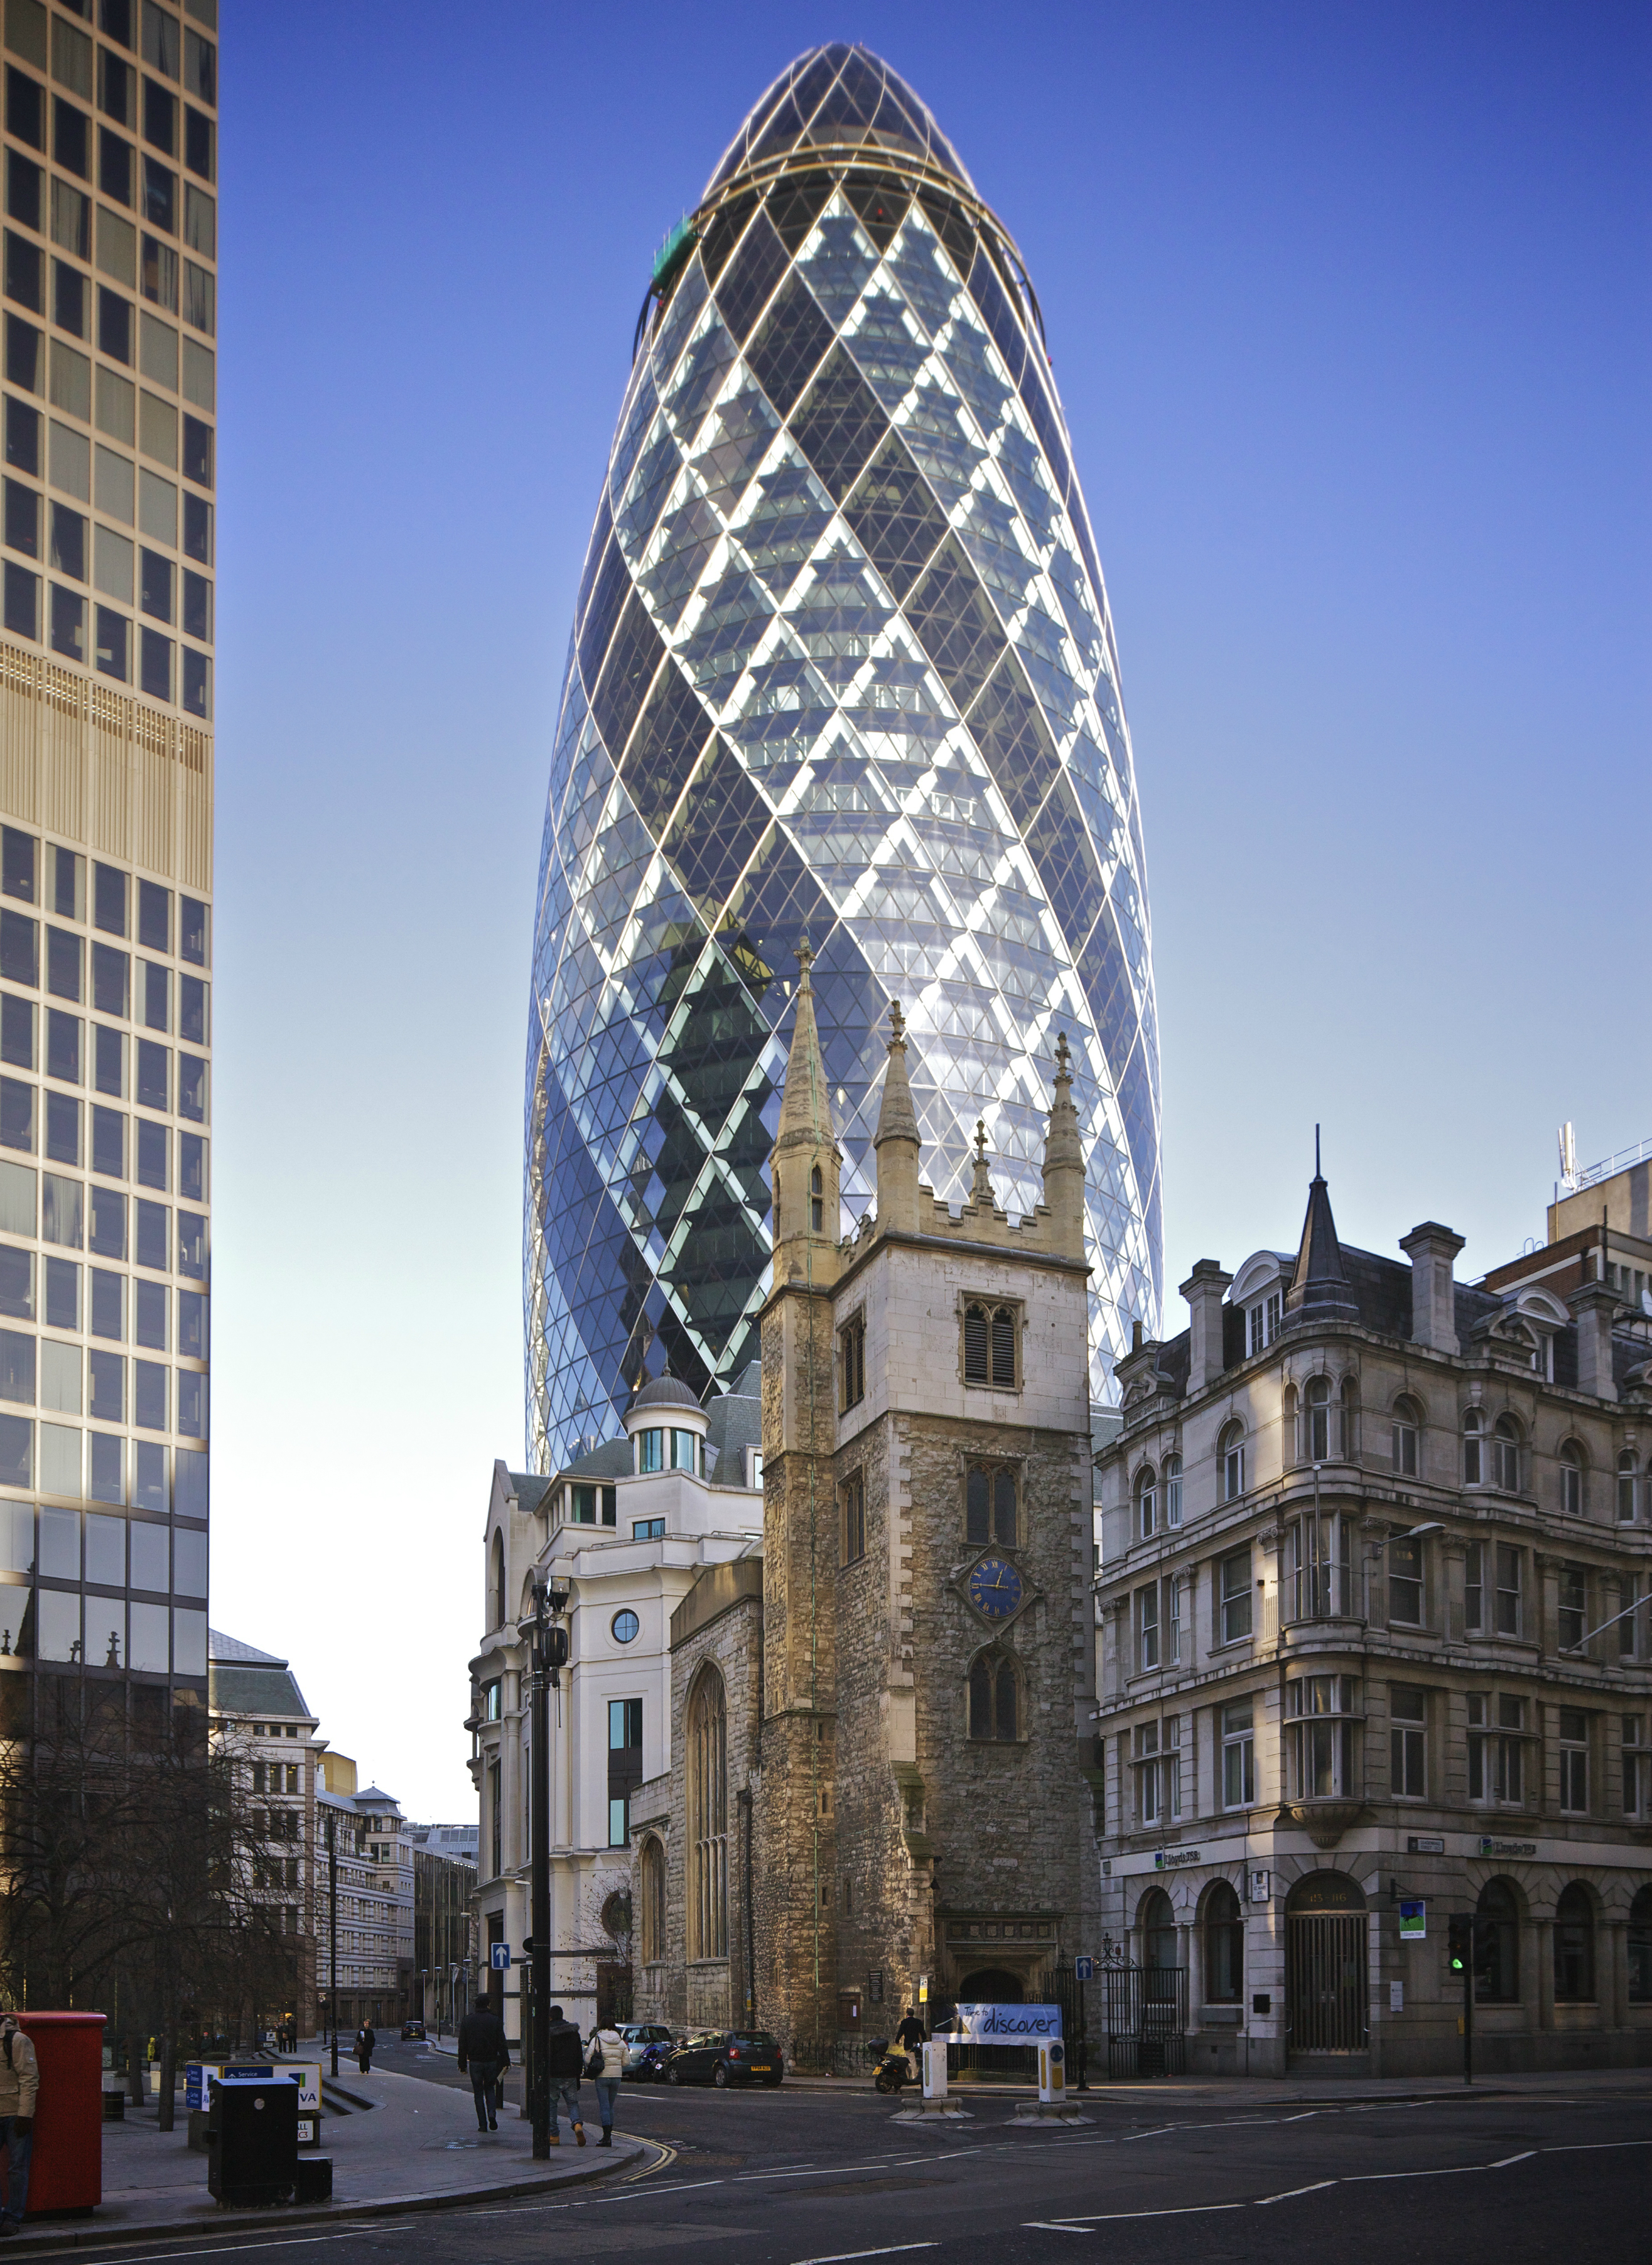 30 St Mary Axe source: wikipedia